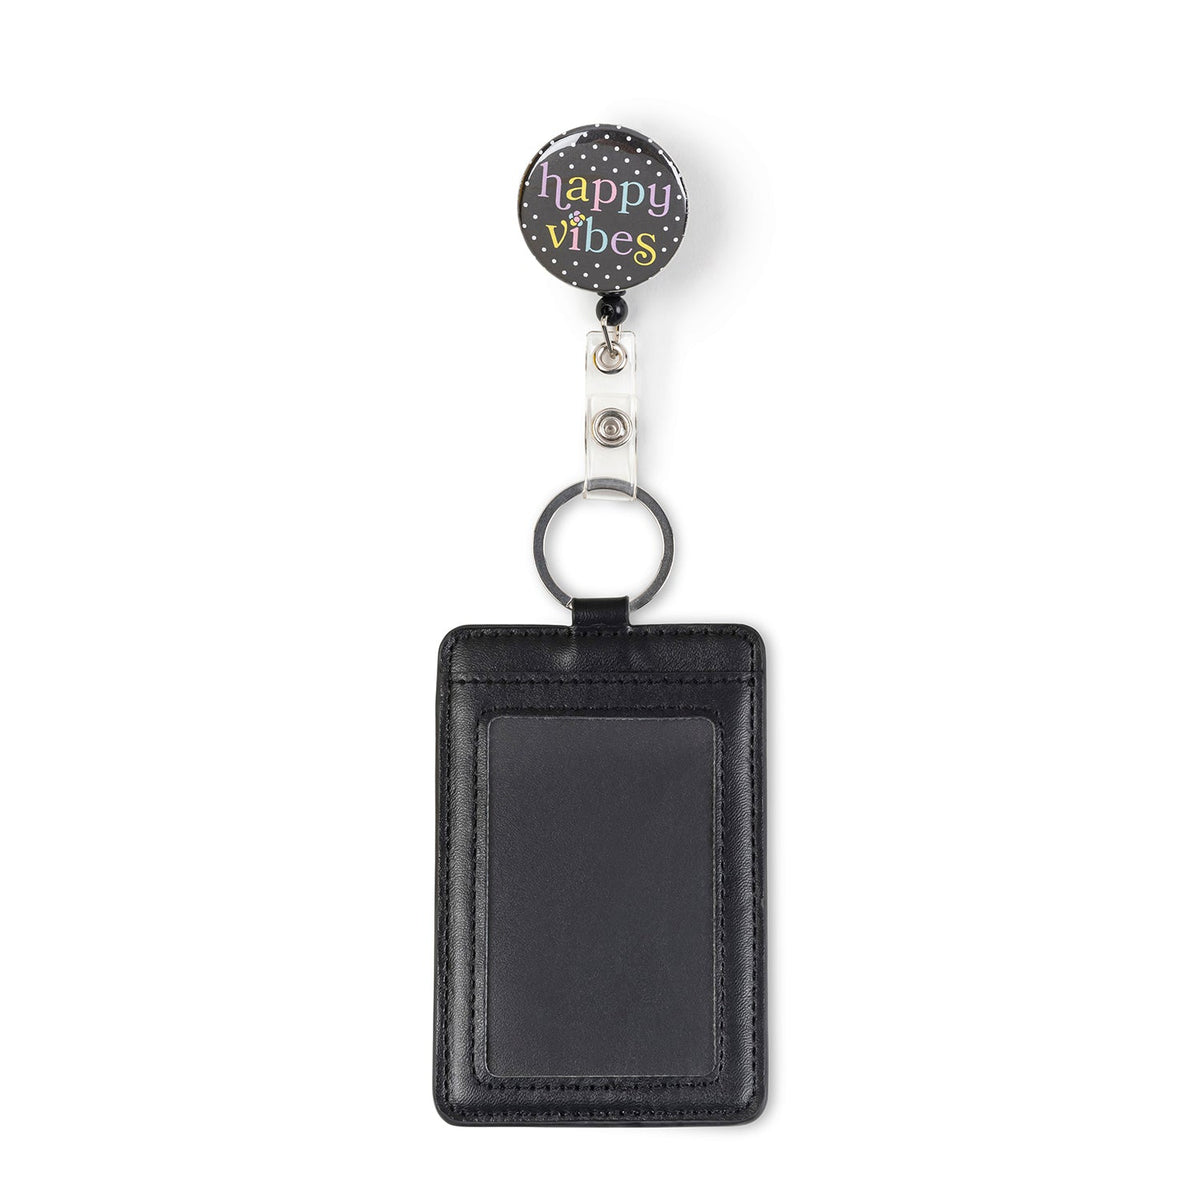 Happy Vibes Button Badge Reel with Pocket